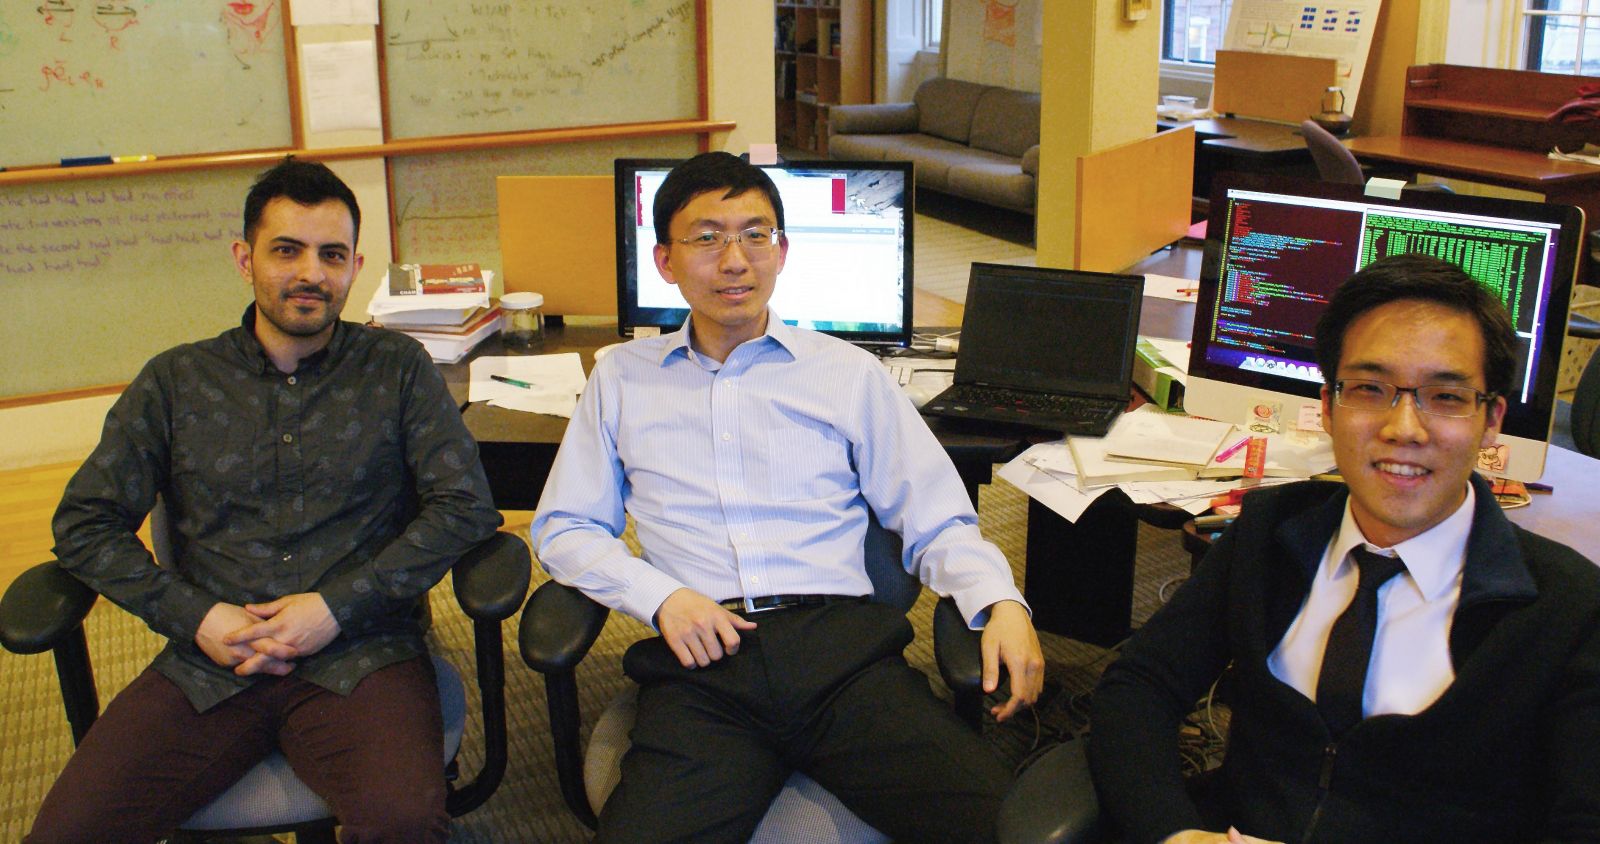 Co-Founders, from left to right, Jason Stockman, Wei Sun, Andy Yen.